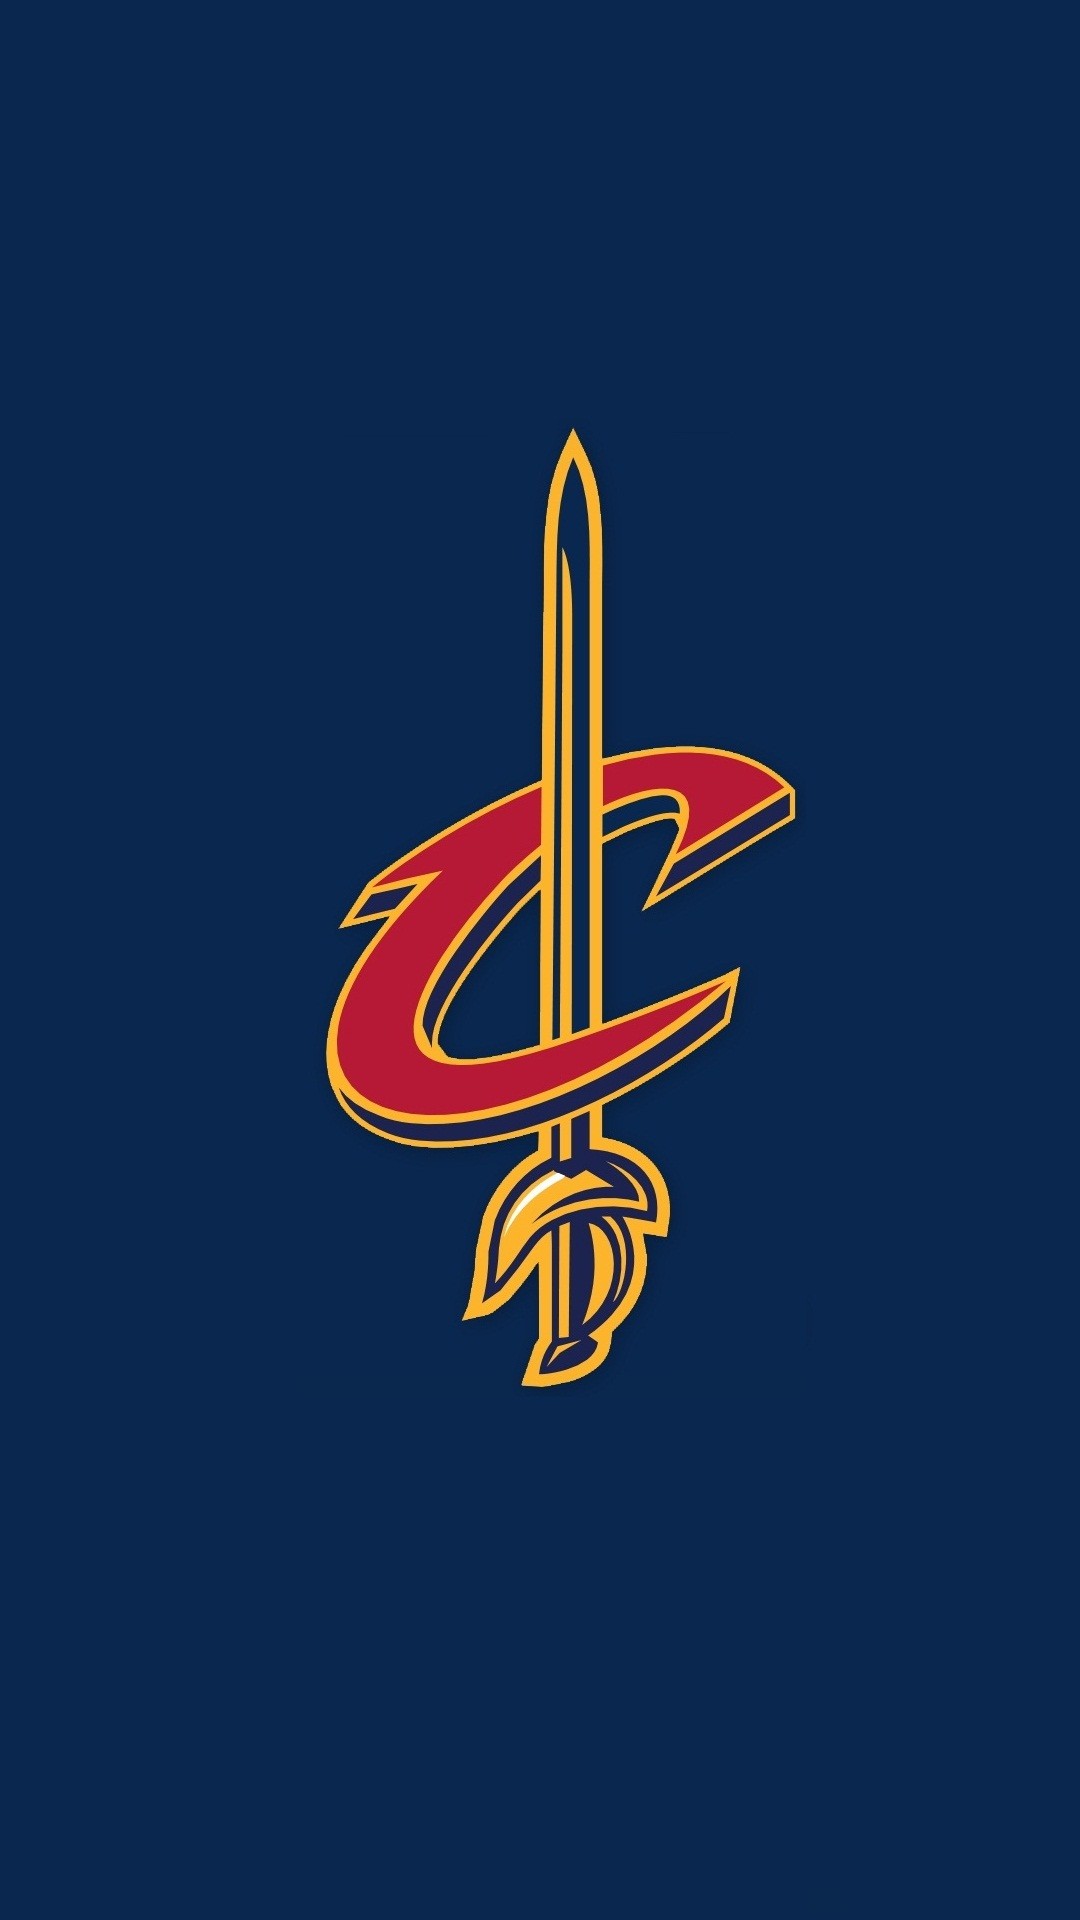 Cleveland Cavaliers Wallpaper For Android resolution 1080x1920